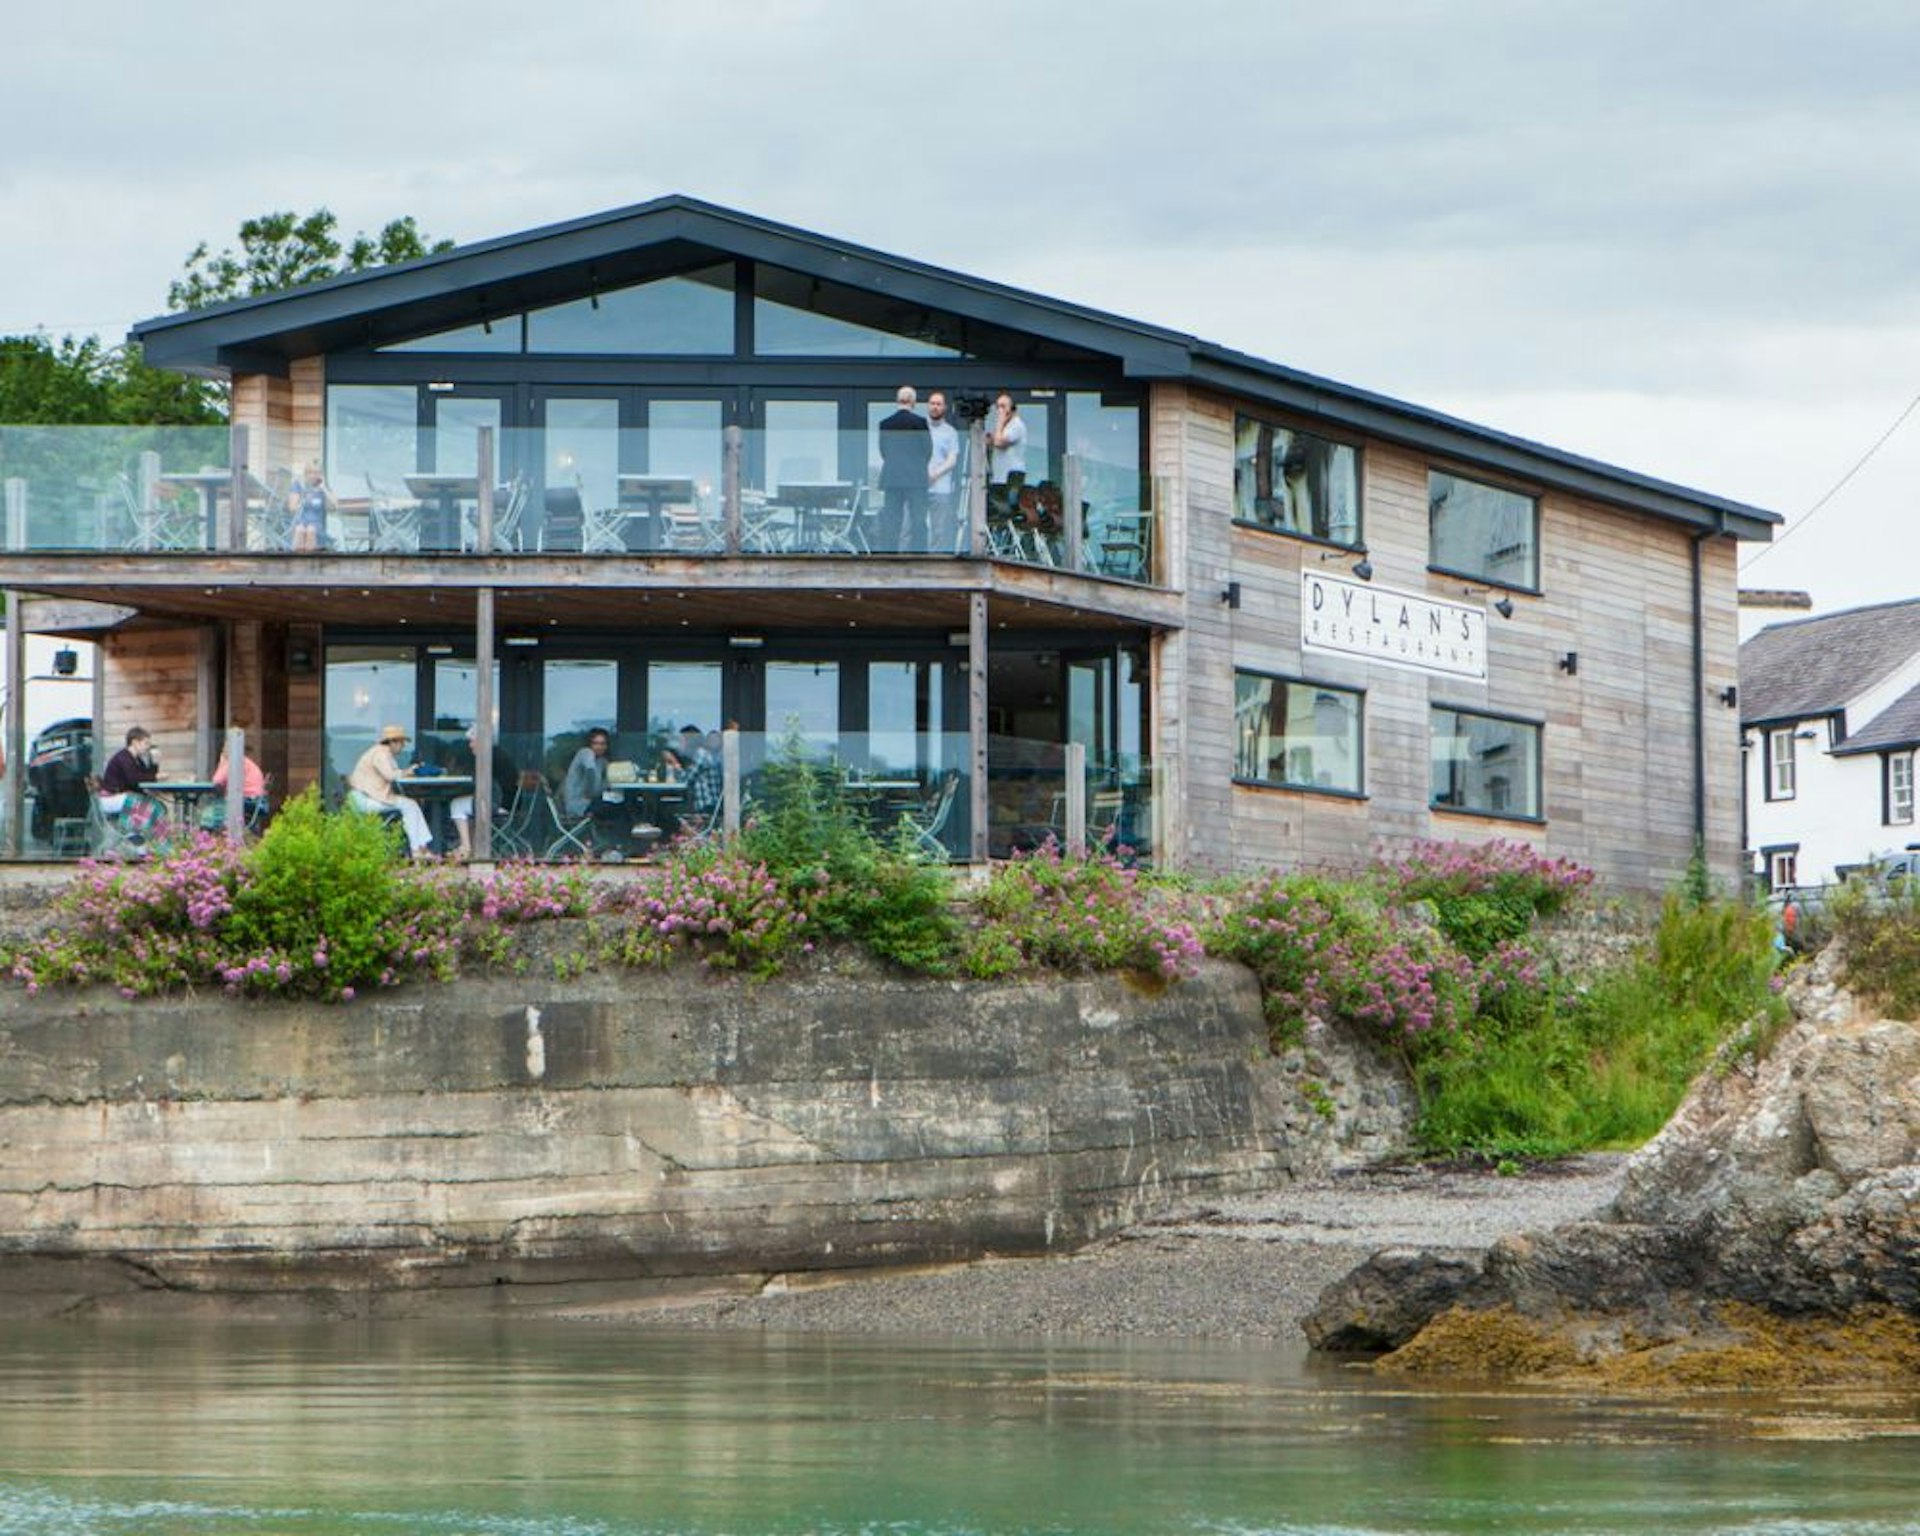 A view of Dylan's restaurant in Menai Bridge, Anglesey, from the water. The restaurant has a balcony, on which a number of diners are sitting, that overlooks the calm water.